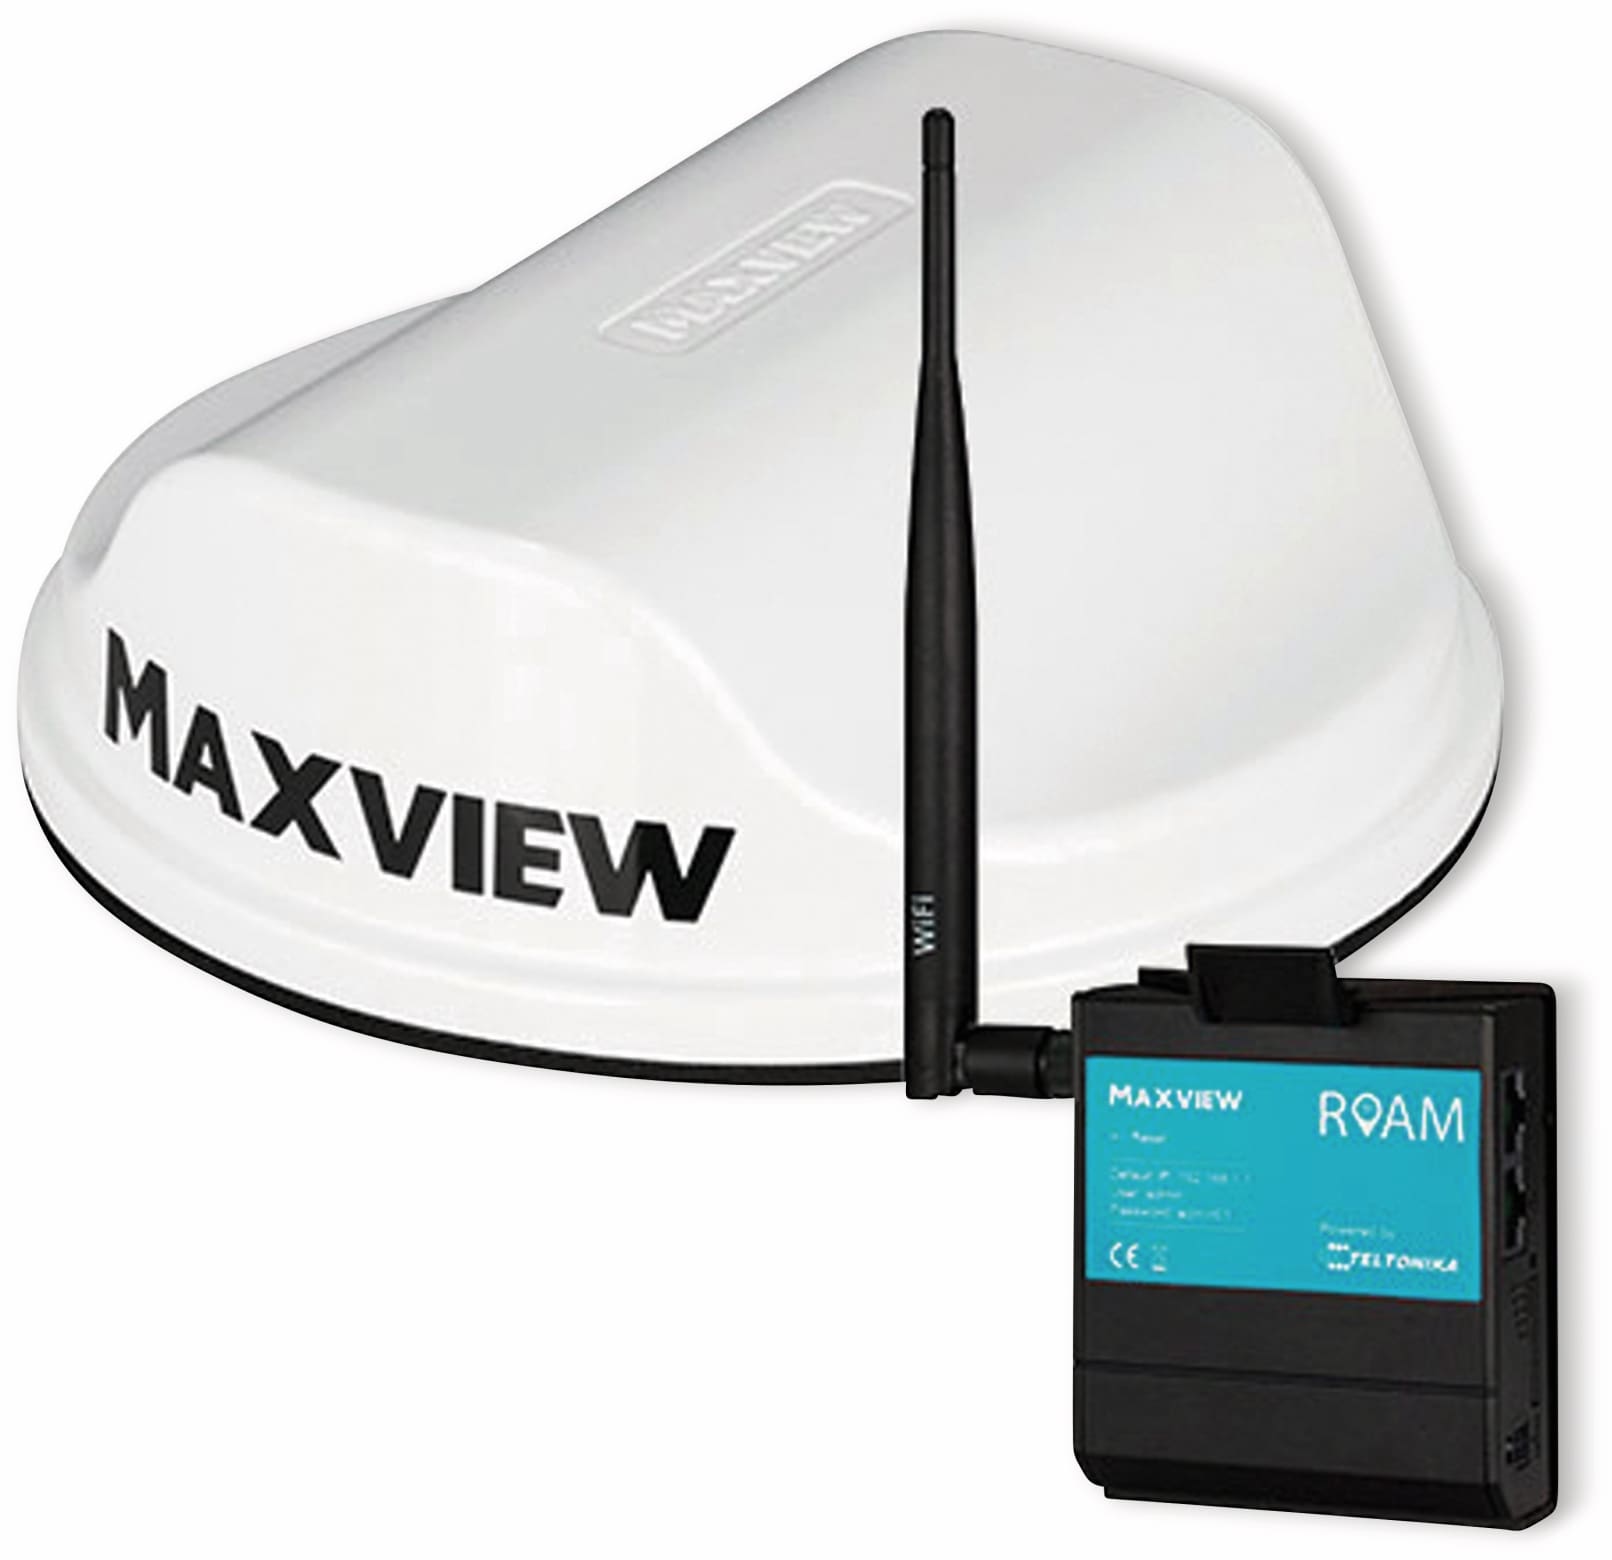 Maxview LTE/WiFi-Antenne Roam, 4G, mit Router